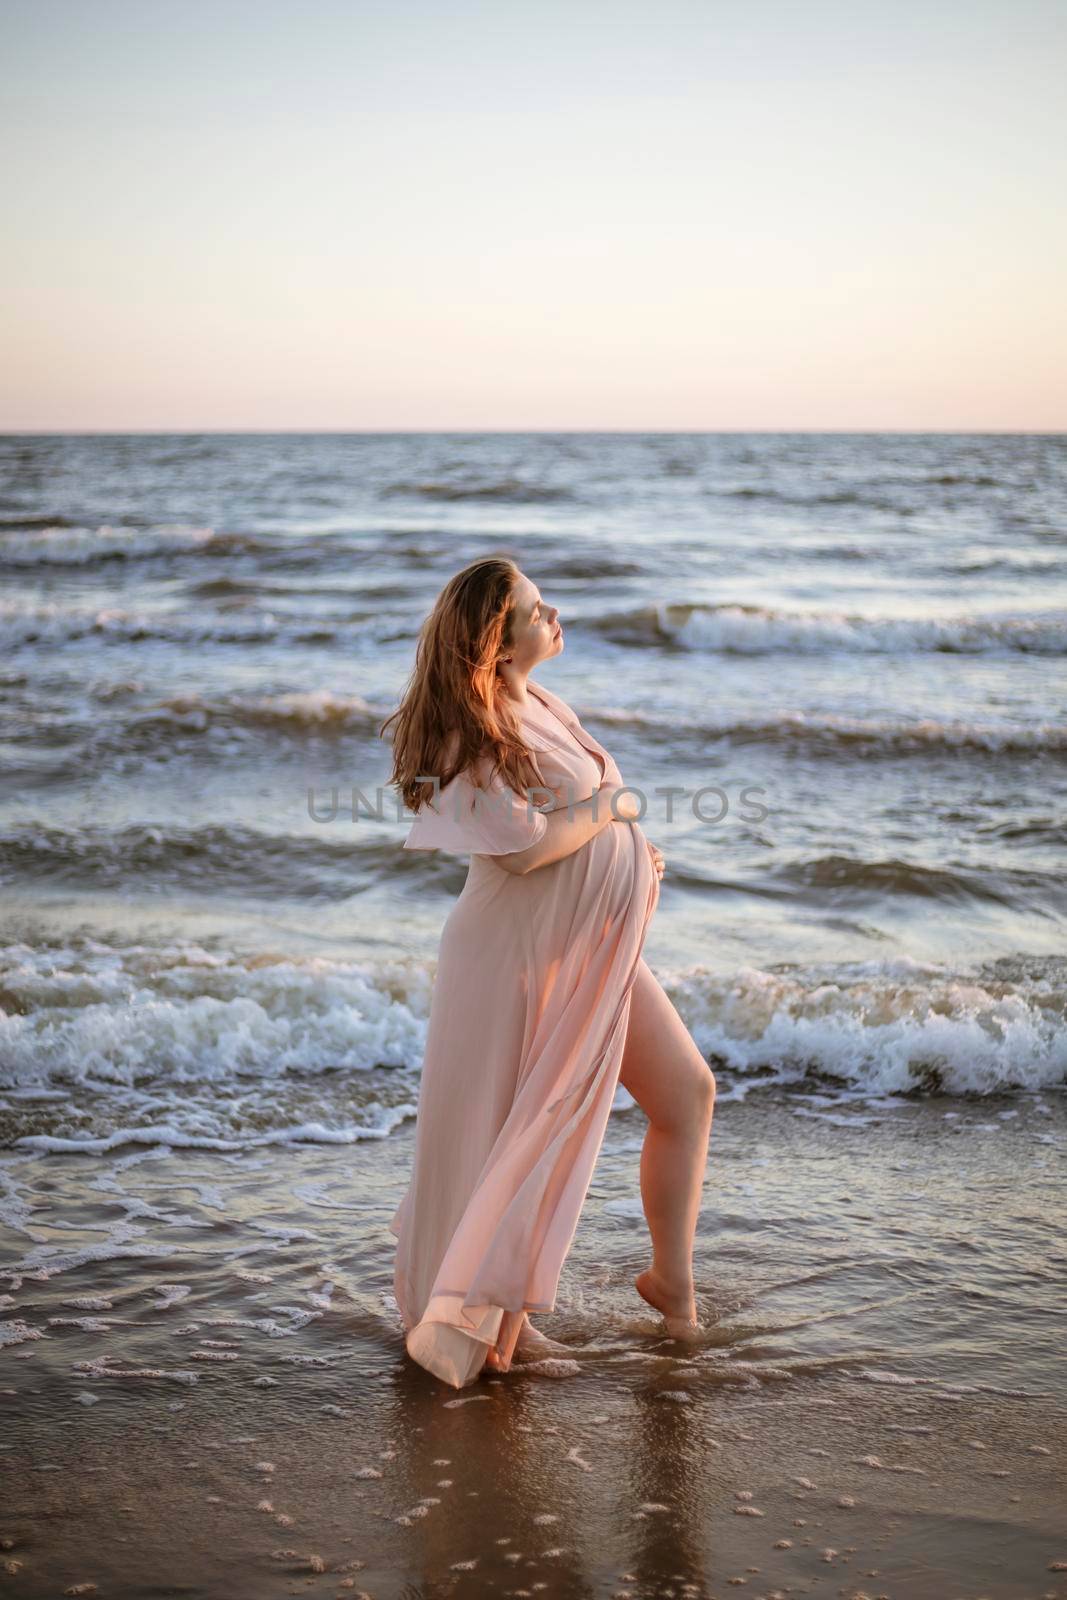 Young pregnant woman with a beautiful sea view on the background. Happy and calm pregnant woman with long hair and pink dress standig on the beach. Romantic view, ocean, sunset, maternity